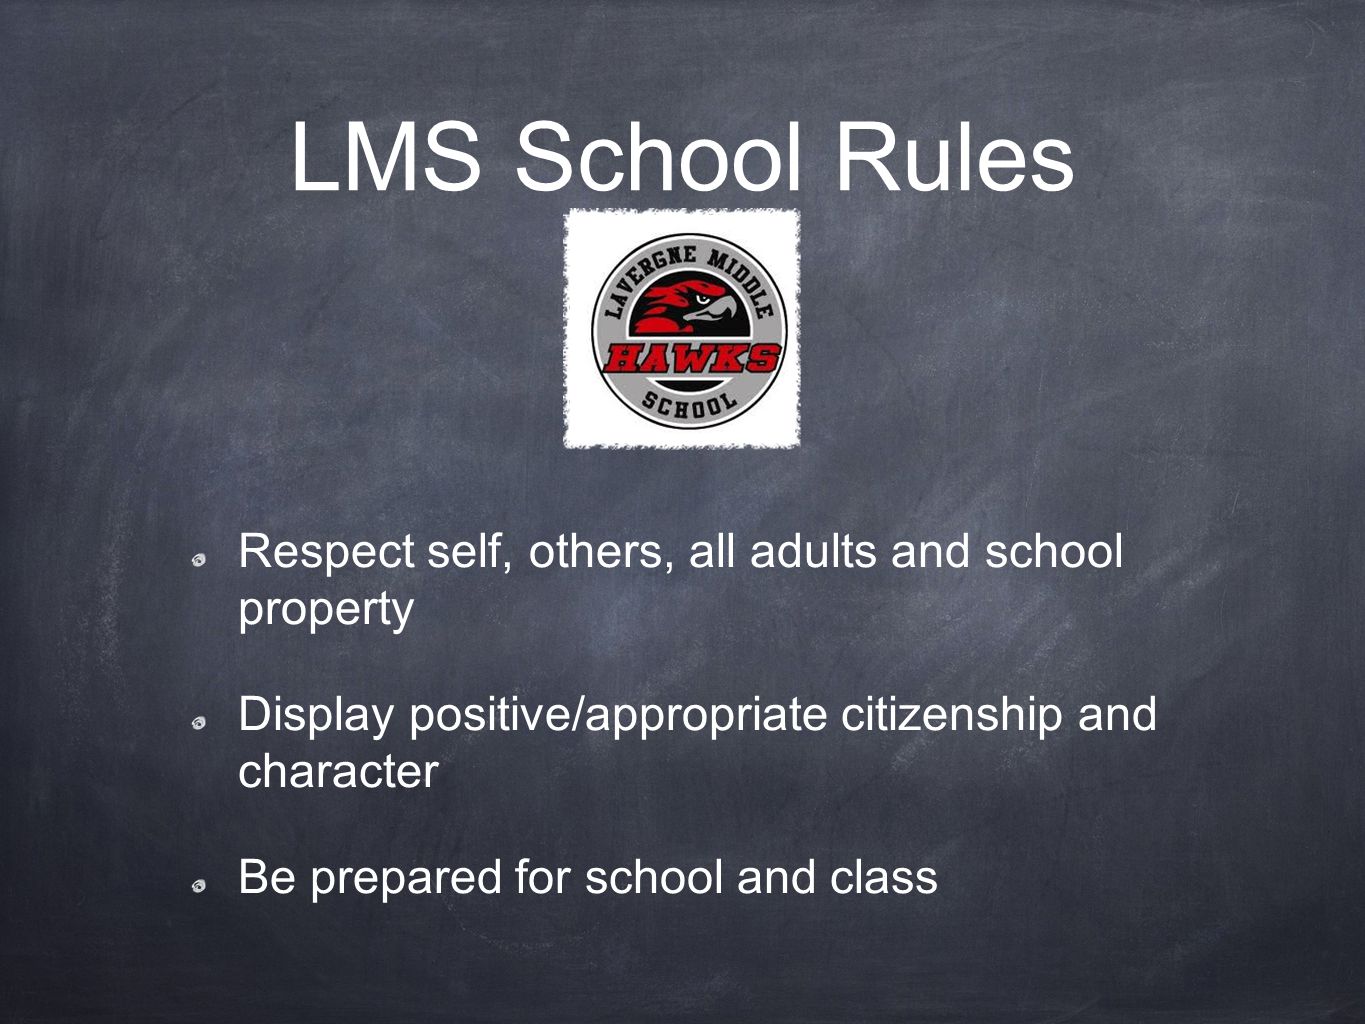 LMS School Rules Respect self, others, all adults and school property Display positive/appropriate citizenship and character Be prepared for school and class